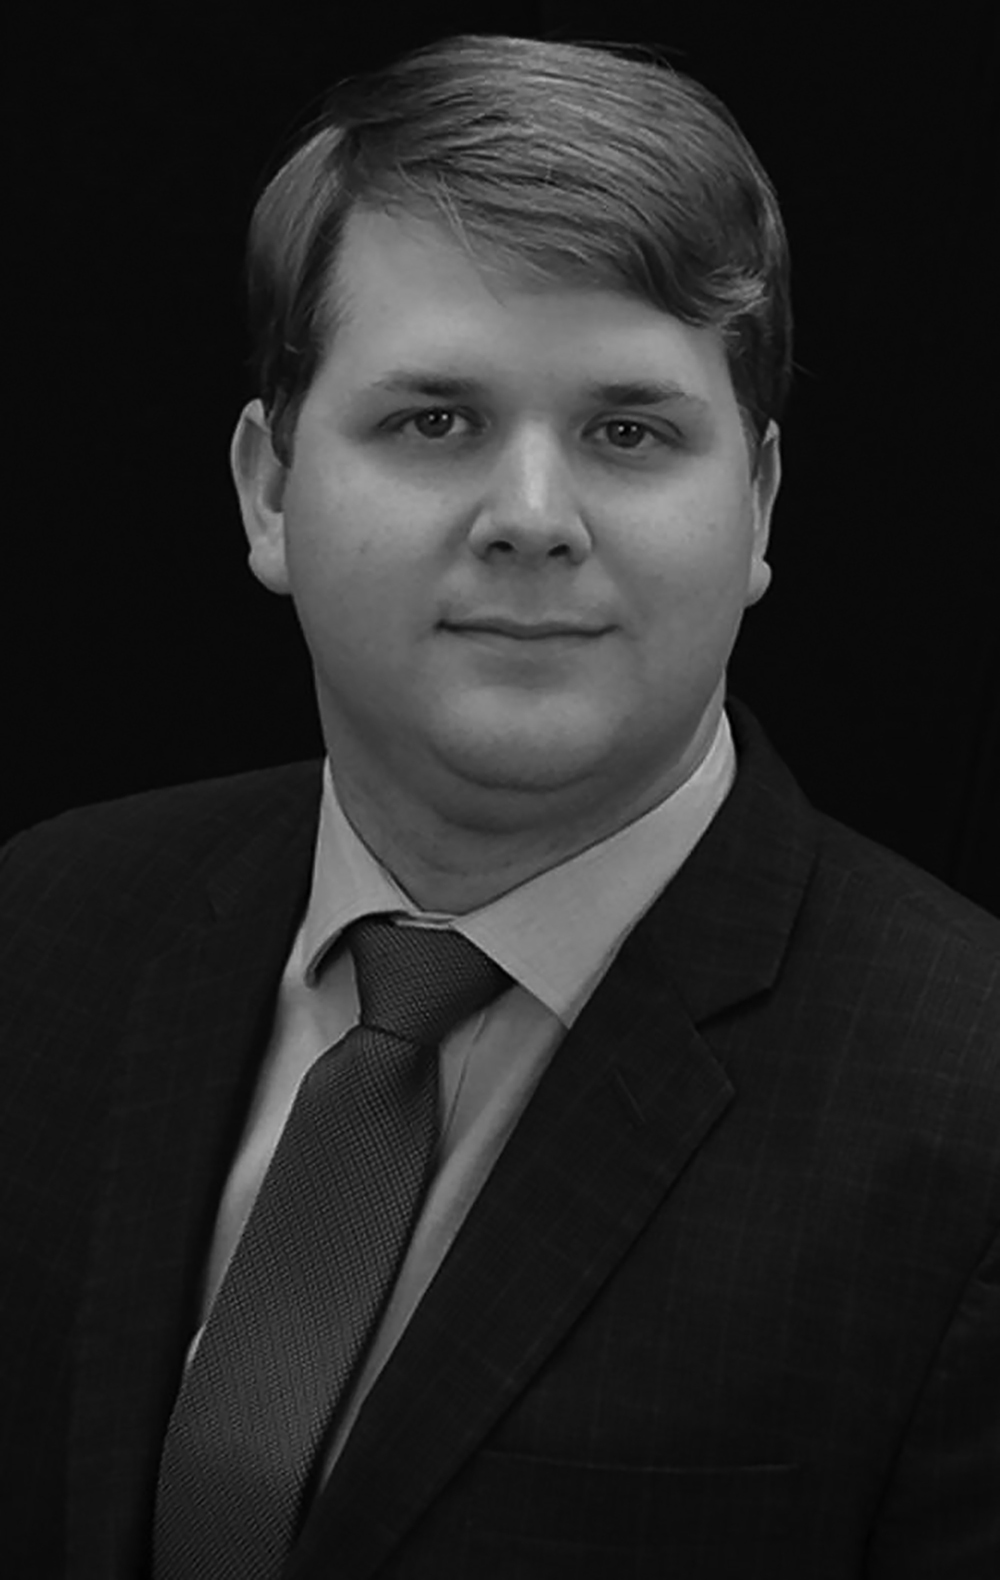 Ryan Bates | Sr. Industrial Account Manager